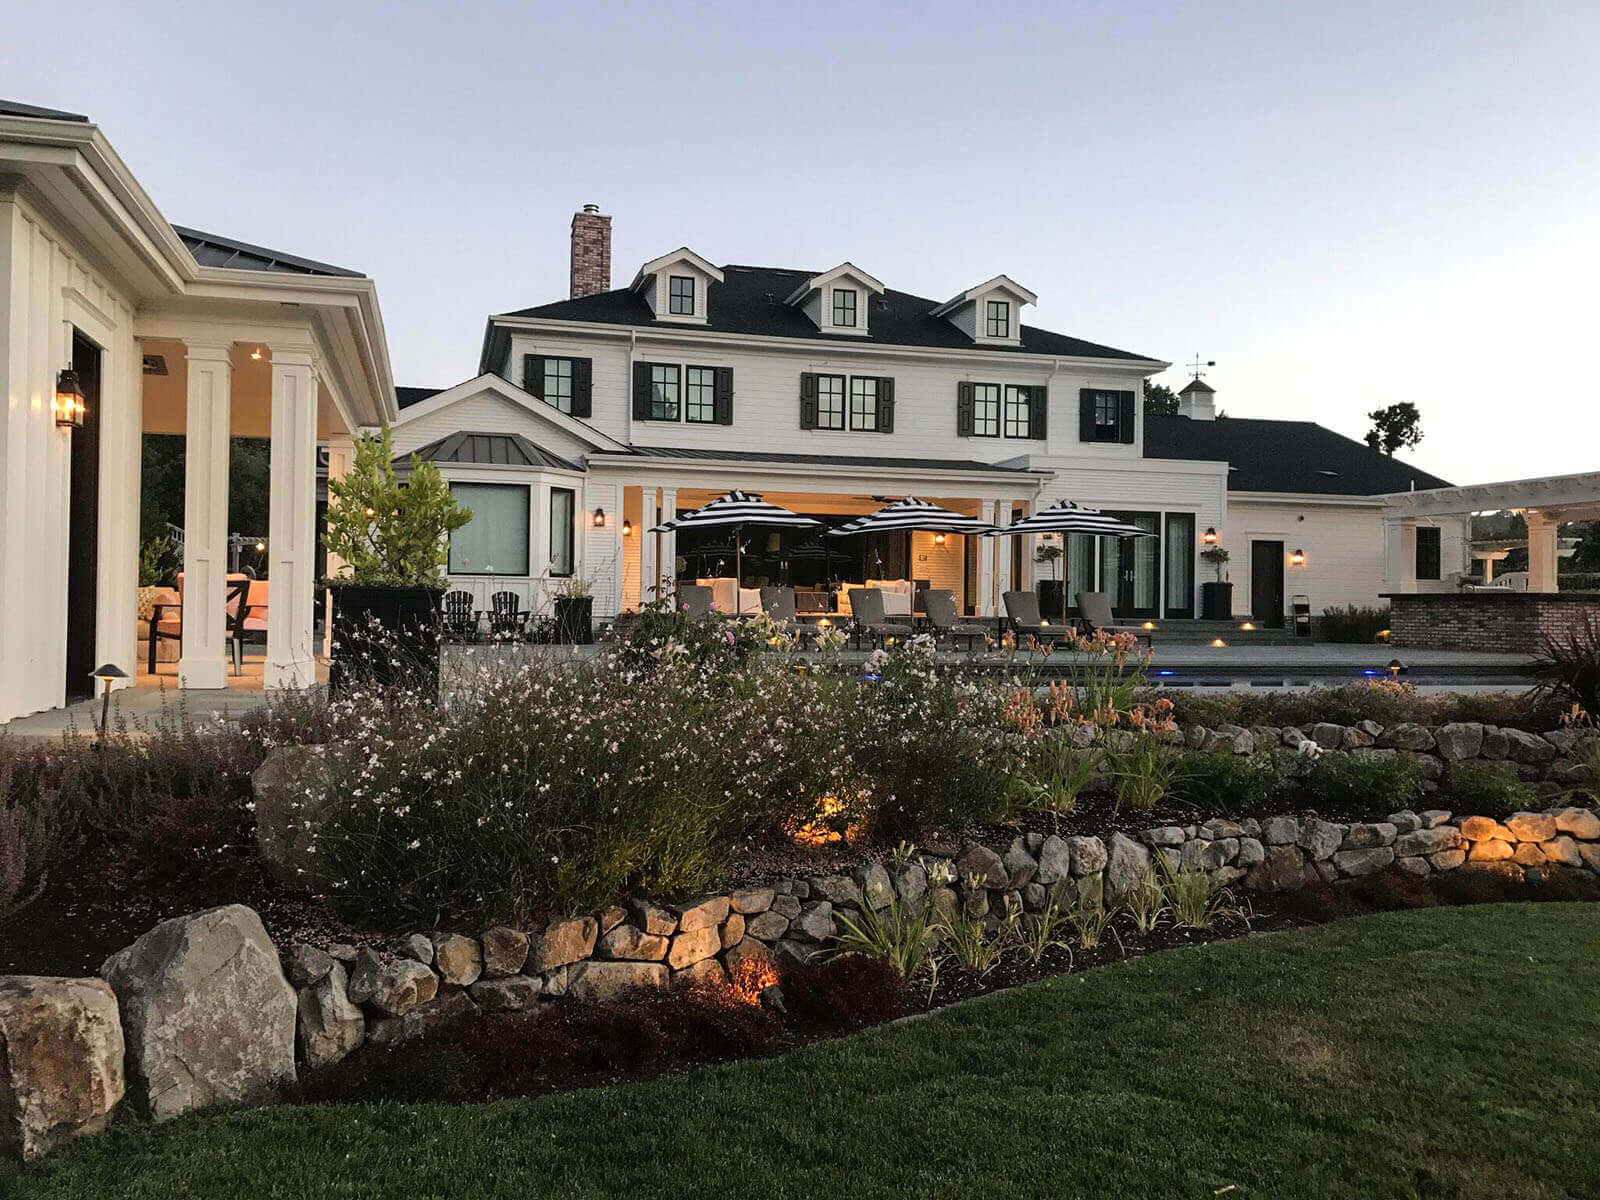 Outdoor lighting at sunset, light fixtures around the edge of the structures, and accent lighting on staged gardening areas